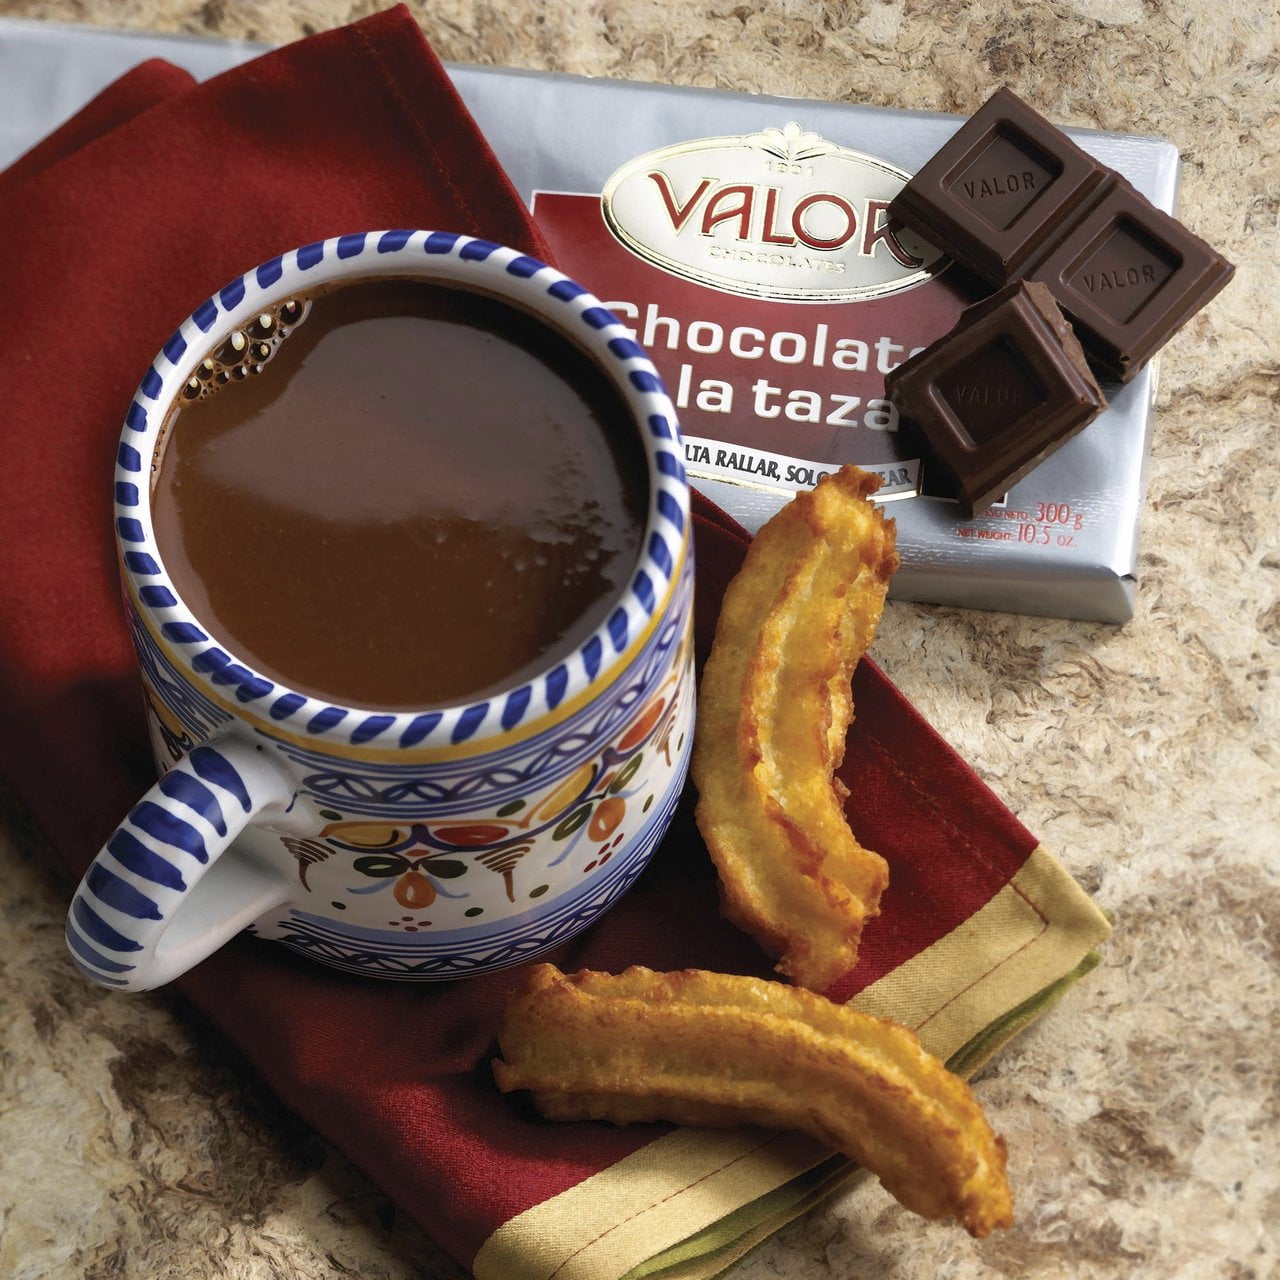 Valor Chocolate a la Taza bar from Spain (makes 8 cups, 10.5 oz